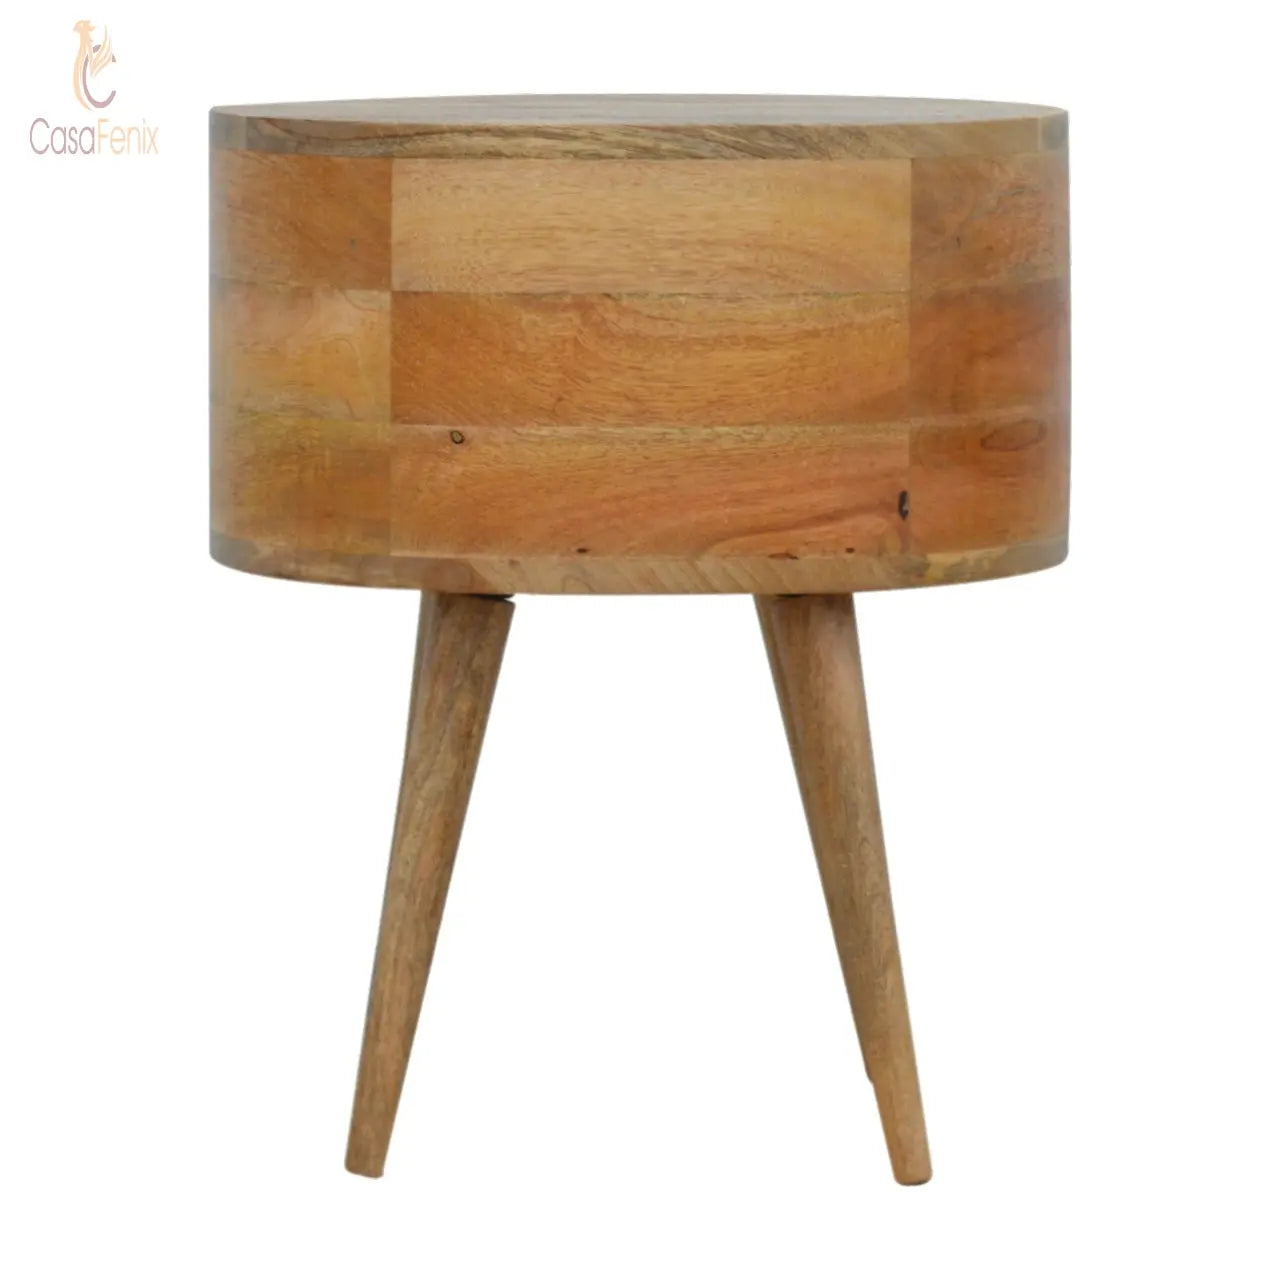 Rounded Bedside Table 2 Drawer Chest Oak-Ish Finish Bedside table / chest CasaFenix